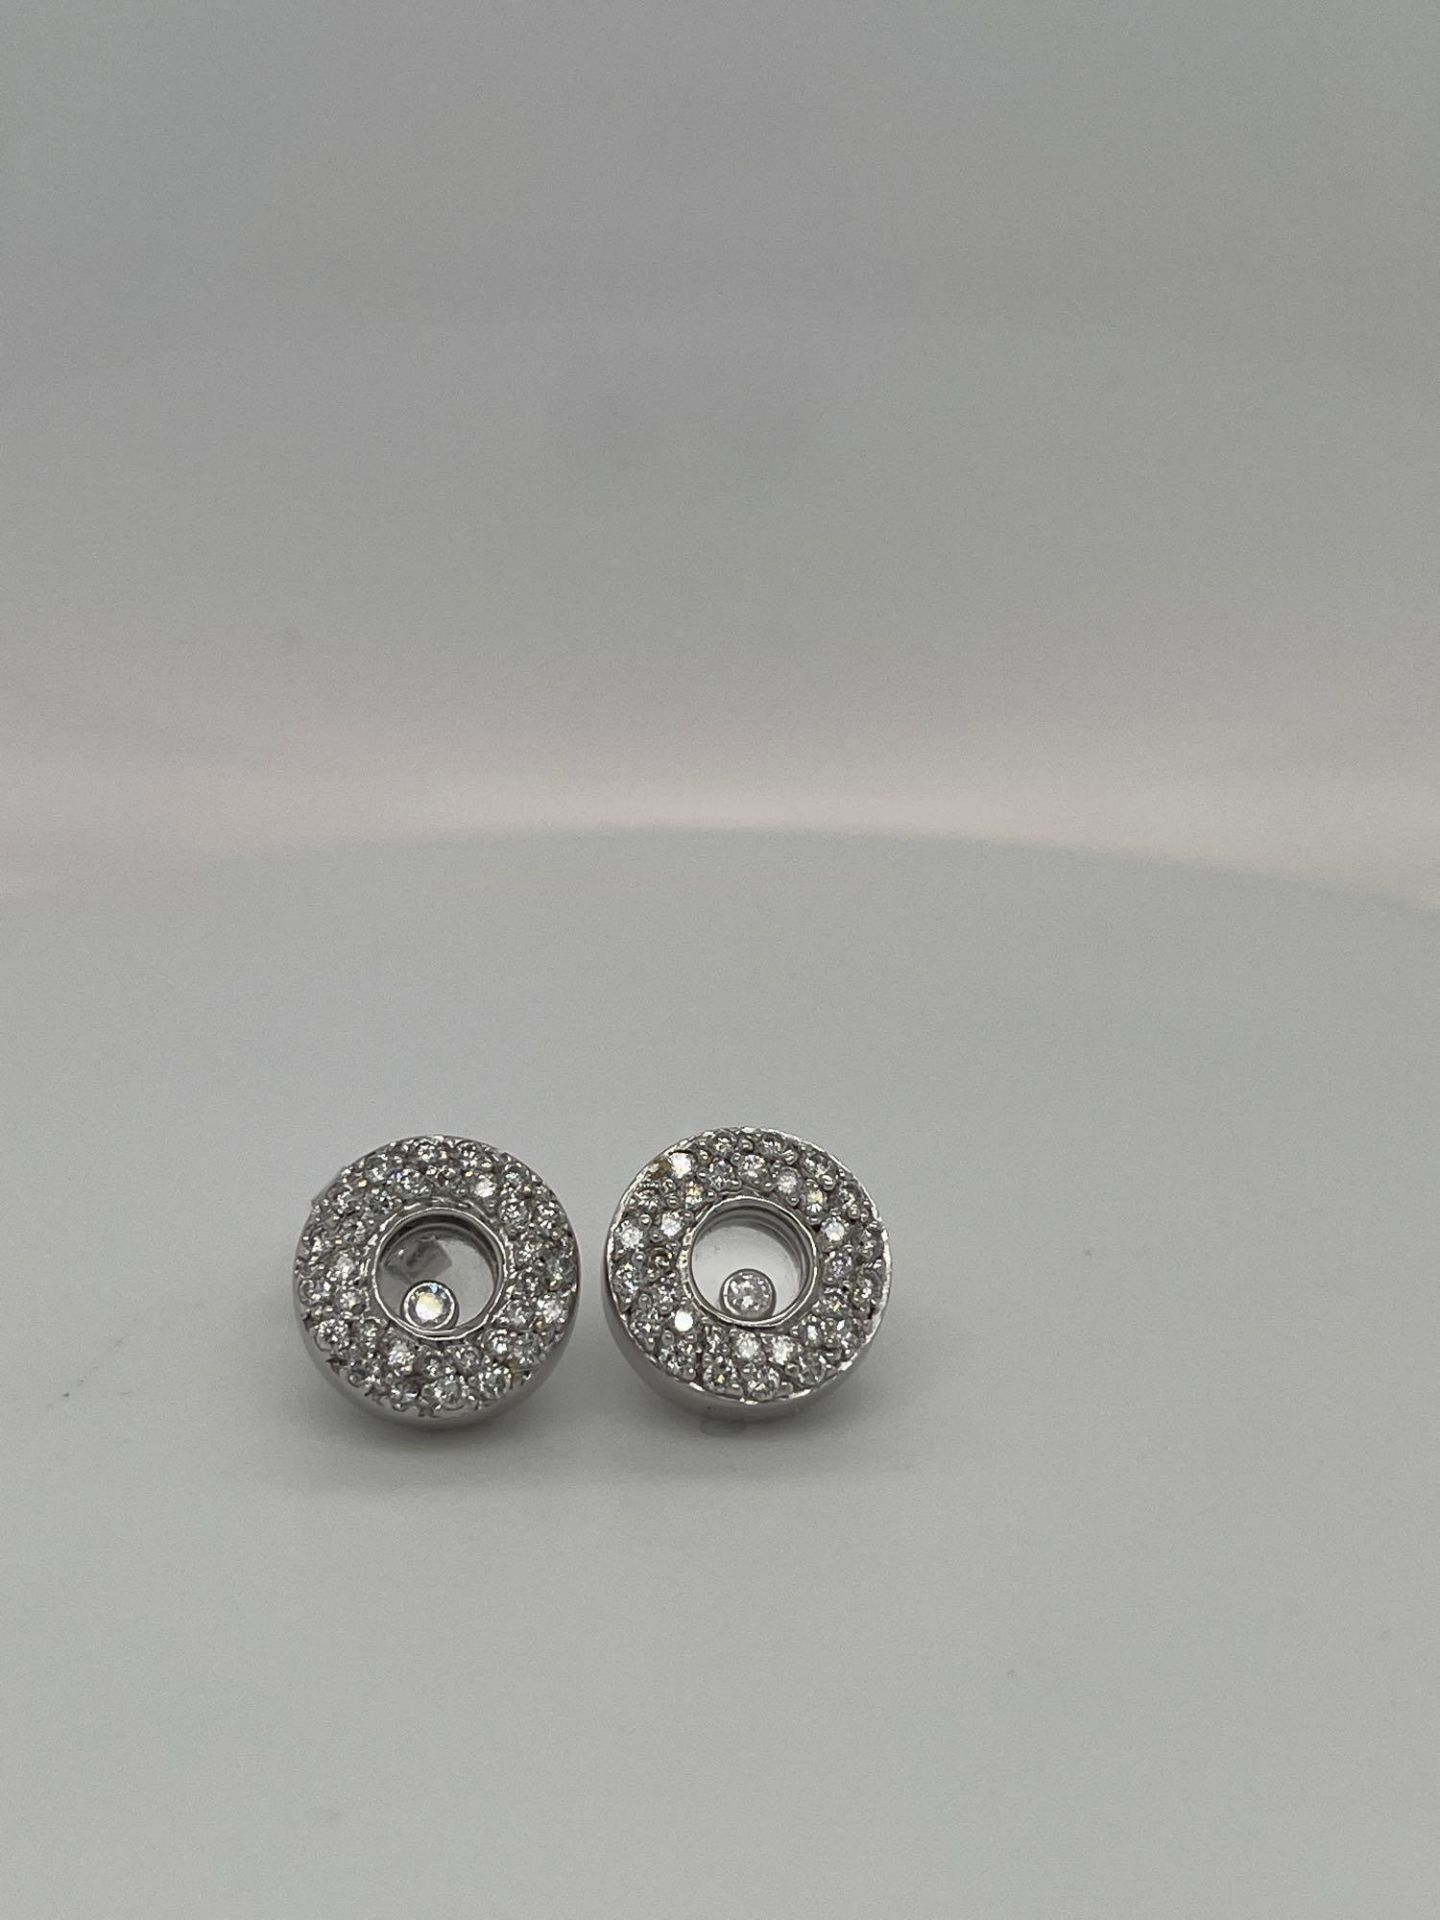 18KT WHITE GOLD CIRCLE DIAMOND EARRINGS .80CT PAVE DIAMONDS/ .80CT 18KT WHITE GOLD NECKLACE .80CT DI